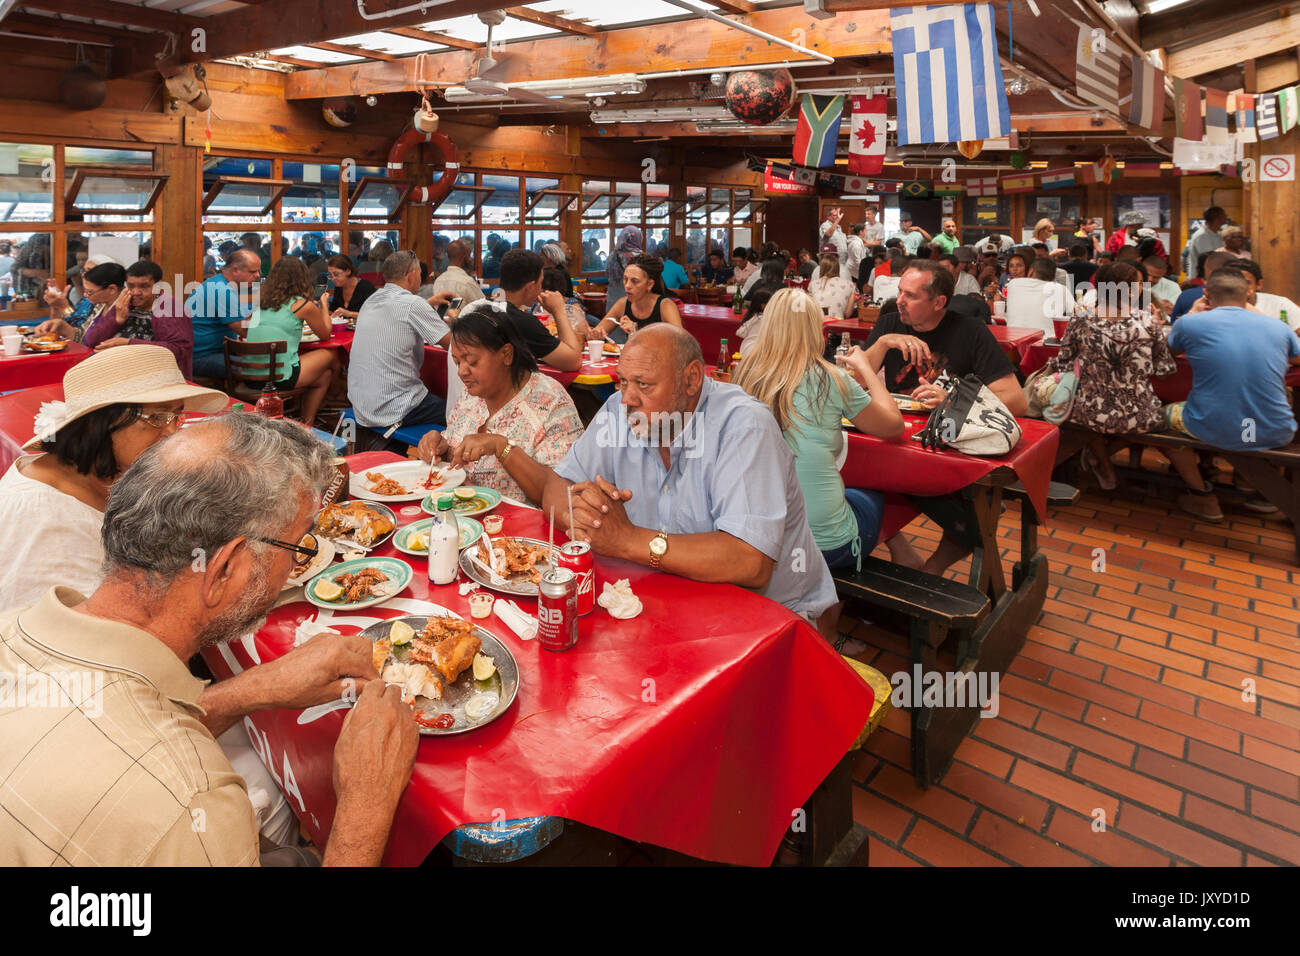 Interior of Kalky's fish & chip restaurant in Kalk Bay harbour, Cape Town, South Africa. Stock Photo